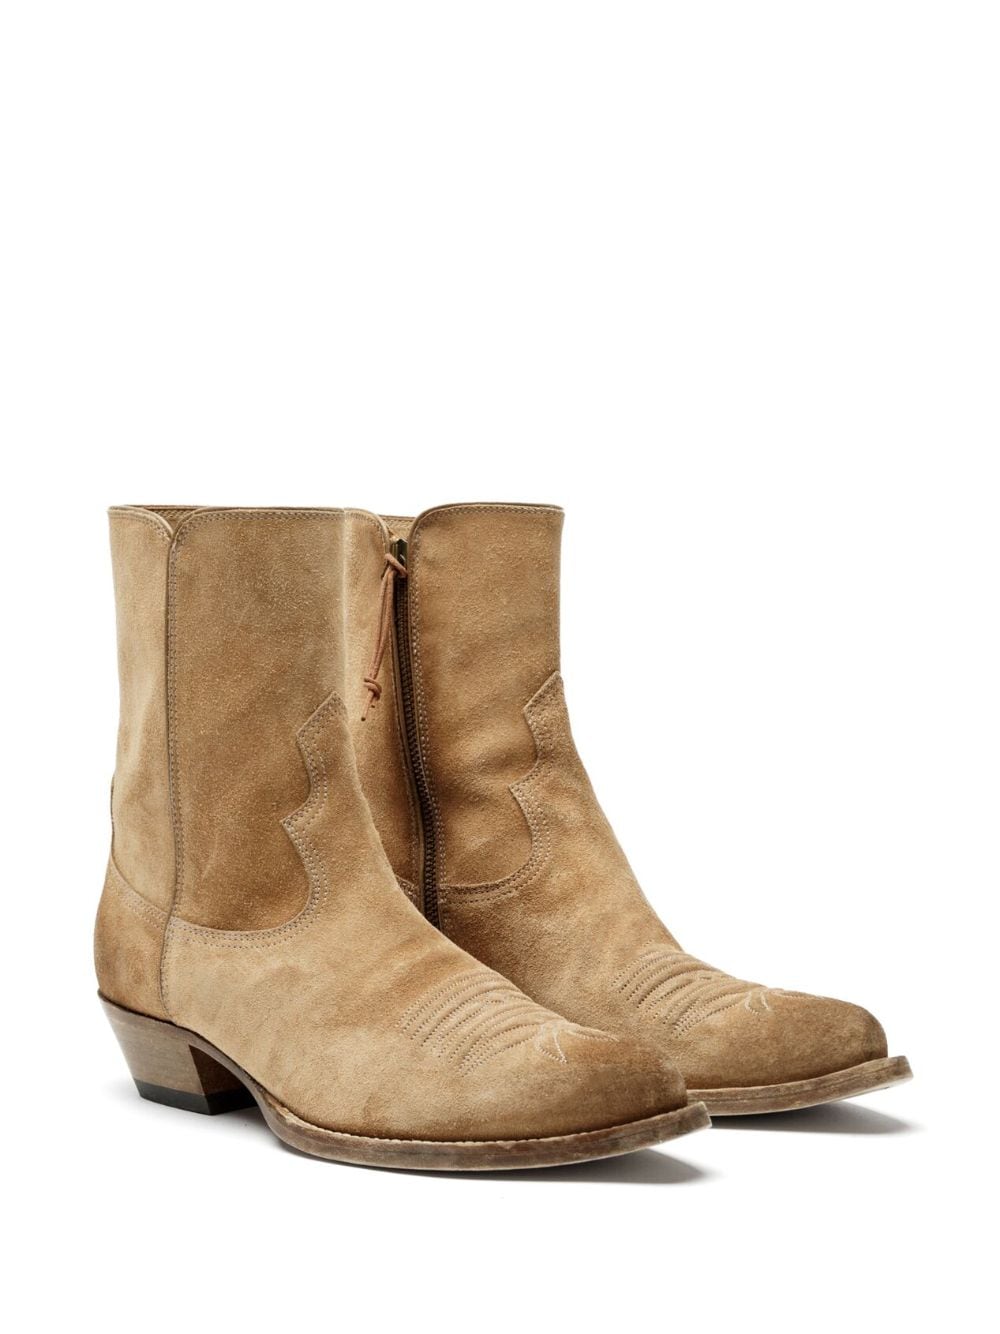 POINTED-TOE WESTERN SUEDE BOOTS